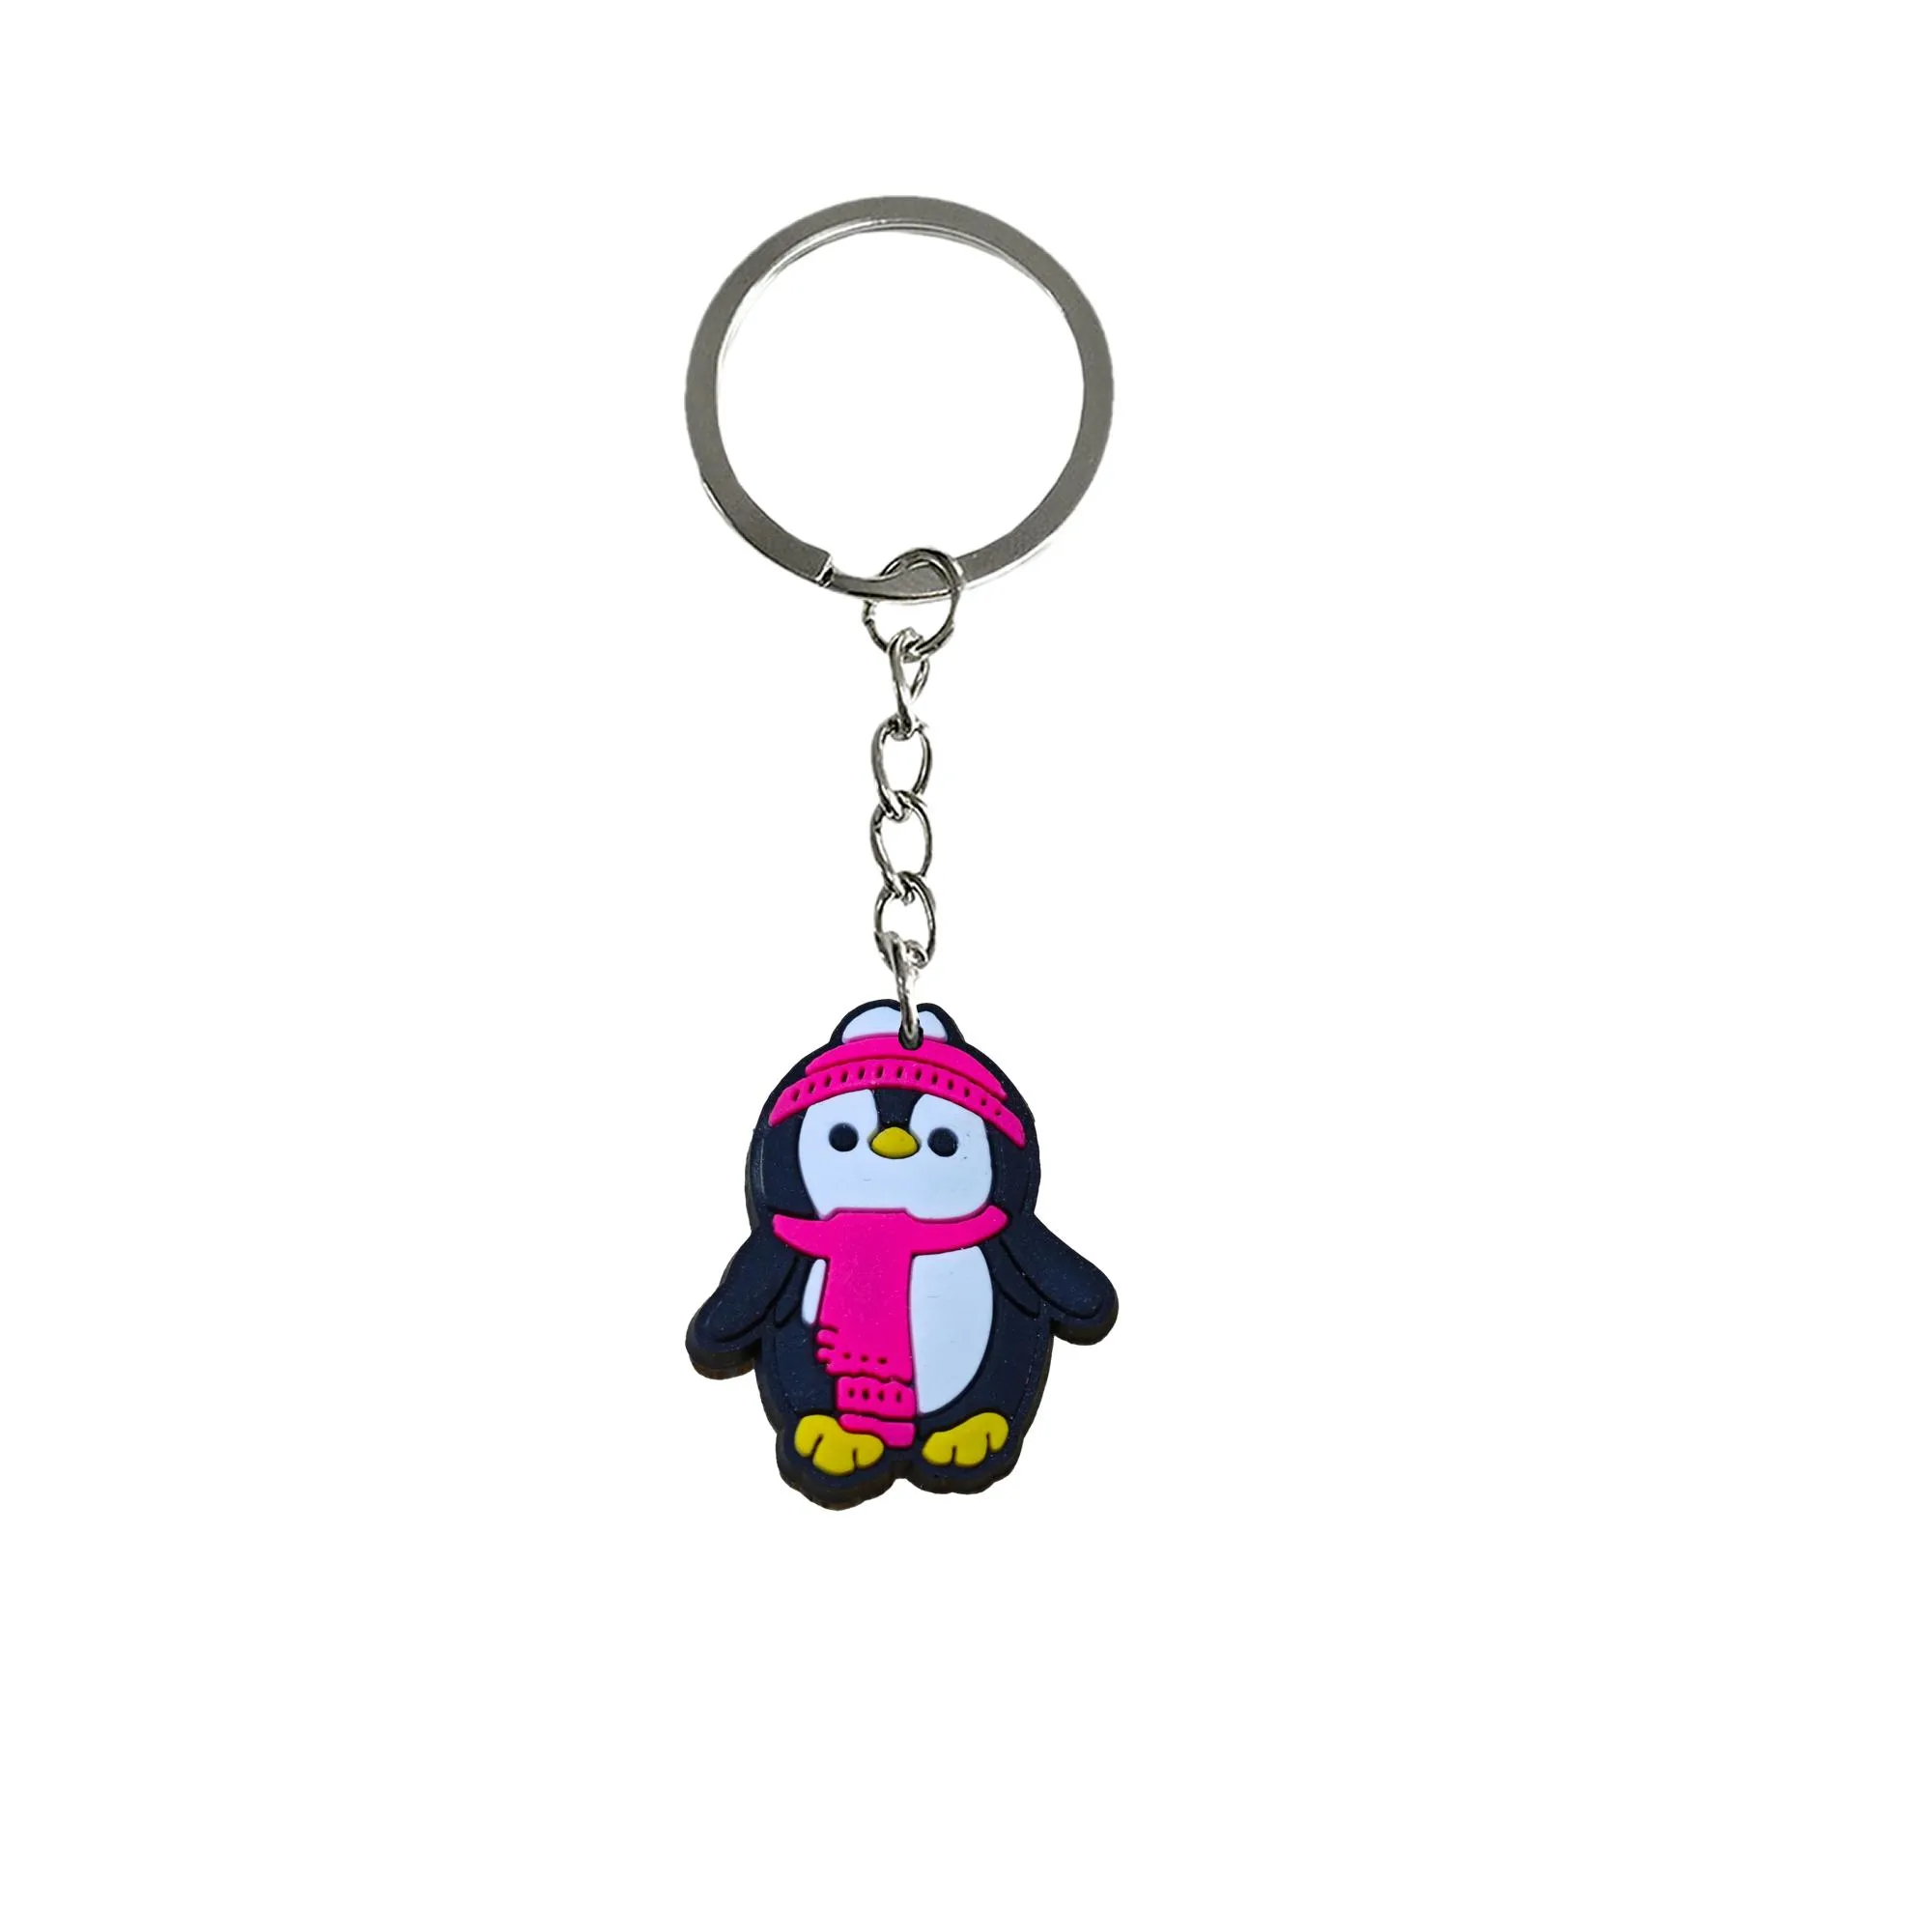 penguin keychain key chain accessories for backpack handbag and car gift valentines day ring boys cool colorful anime character with wristlet keyring suitable schoolbag christmas fans keychains women charms